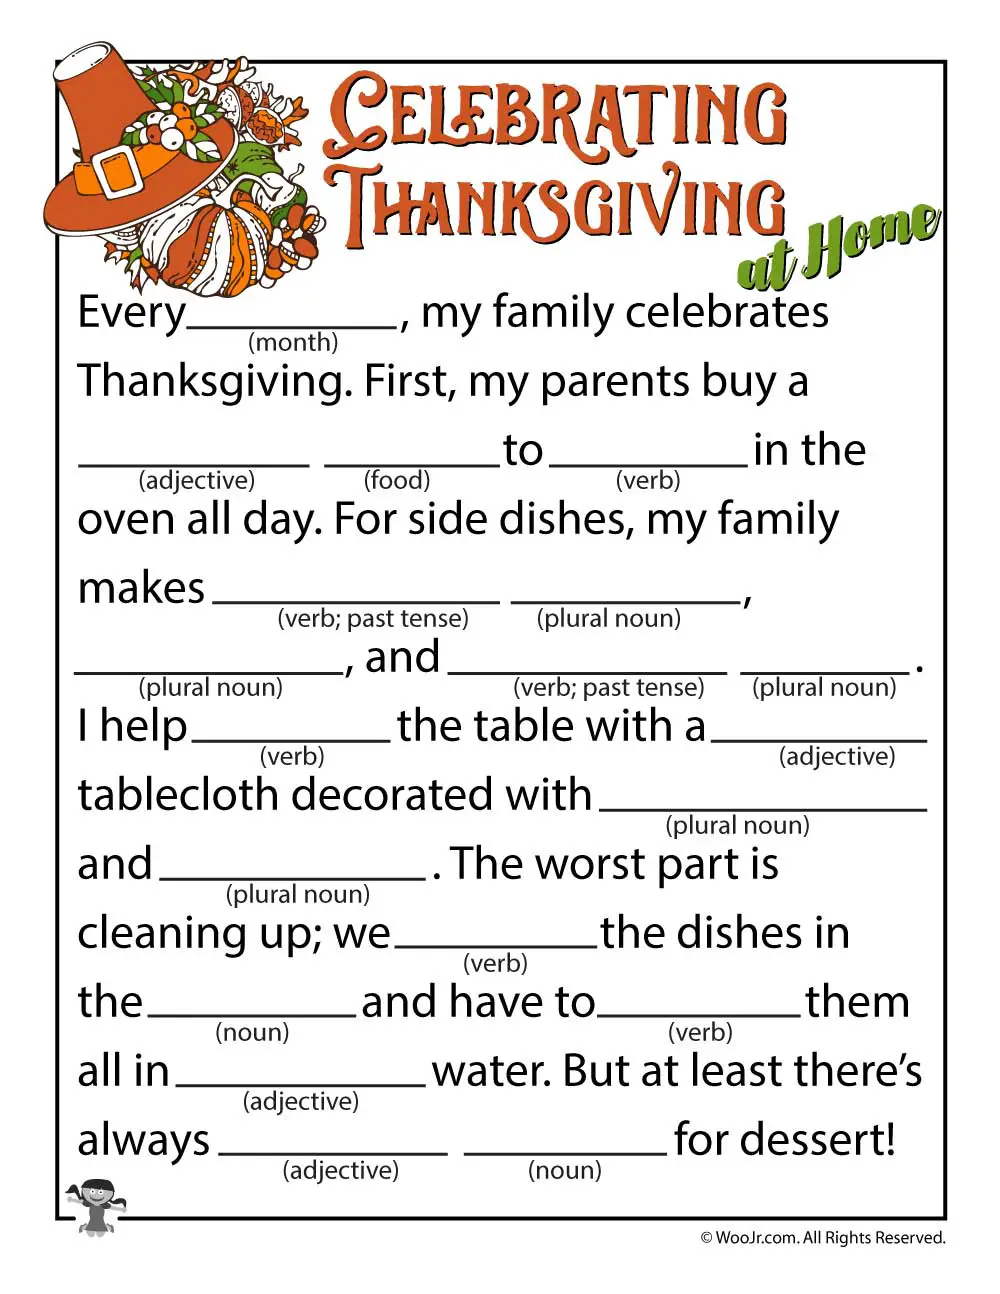 12 Funny Thanksgiving Mad Libs for All